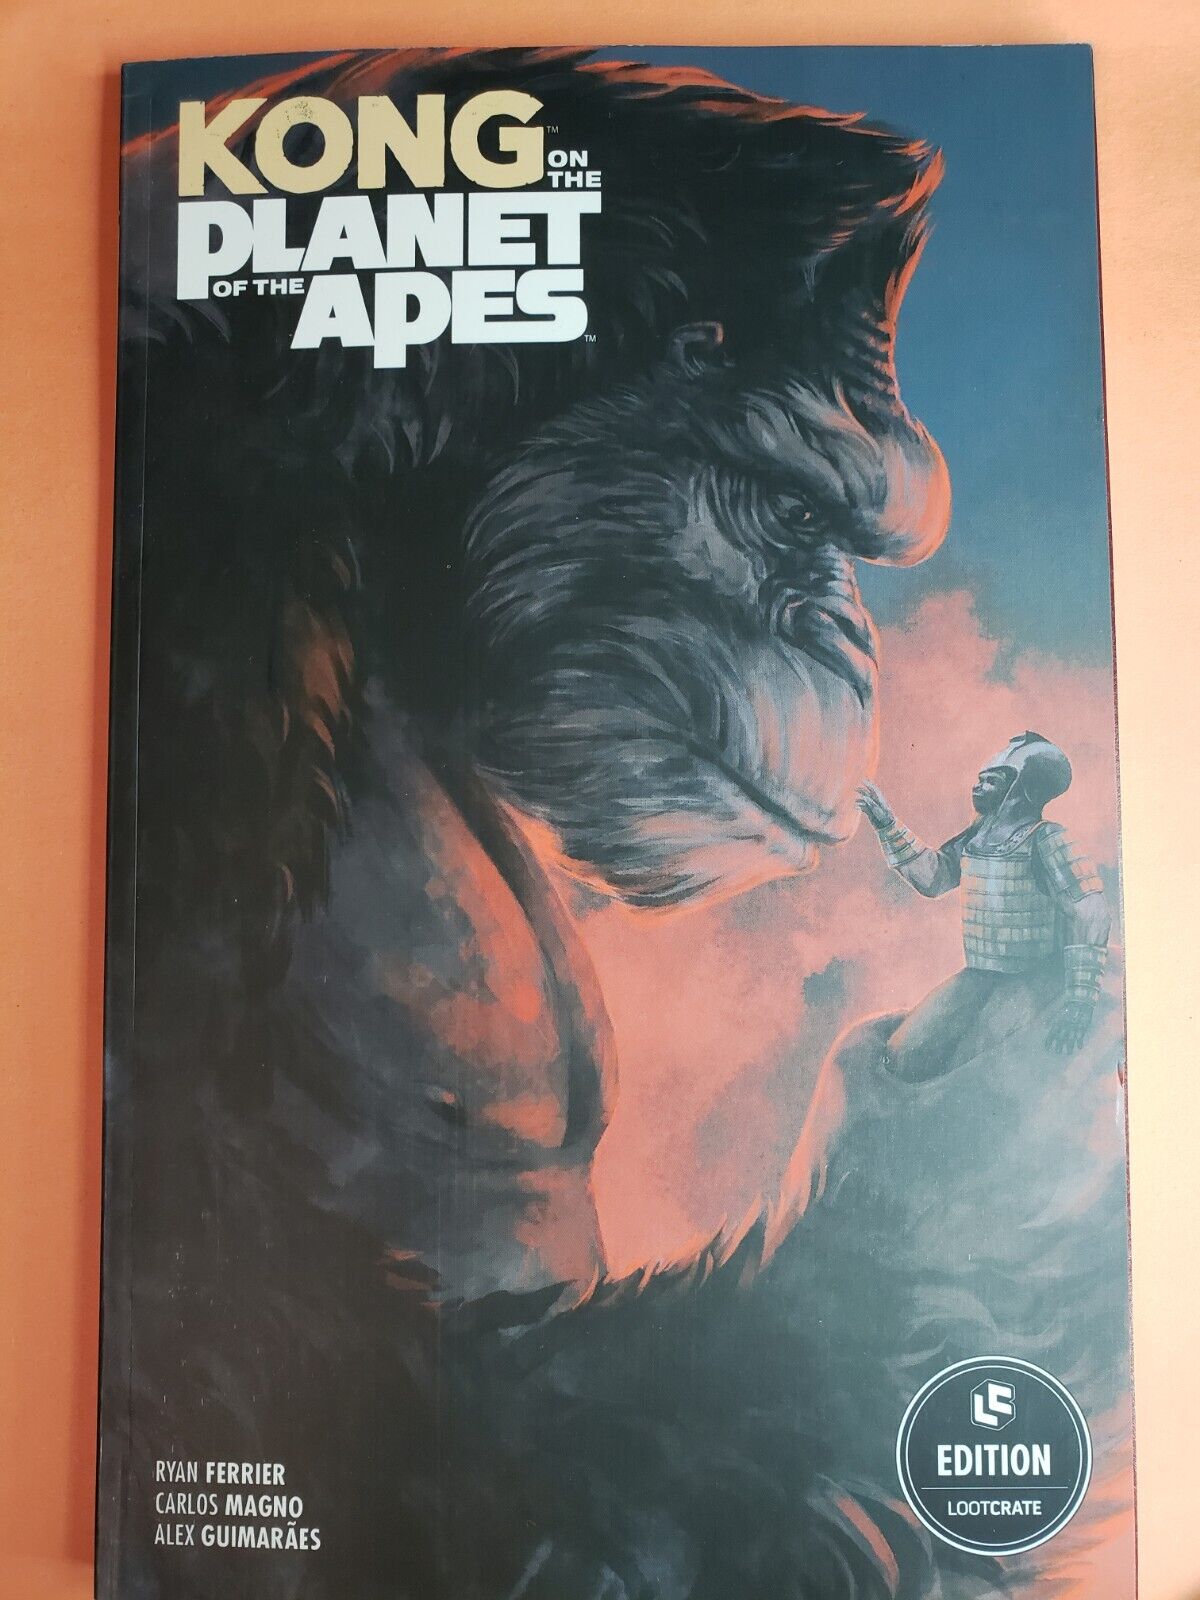 KONG ON THE PLANET OF THE APES  LOOT CRATE EXCLUSIVE TPB EDITION *MONSTERVERSE*